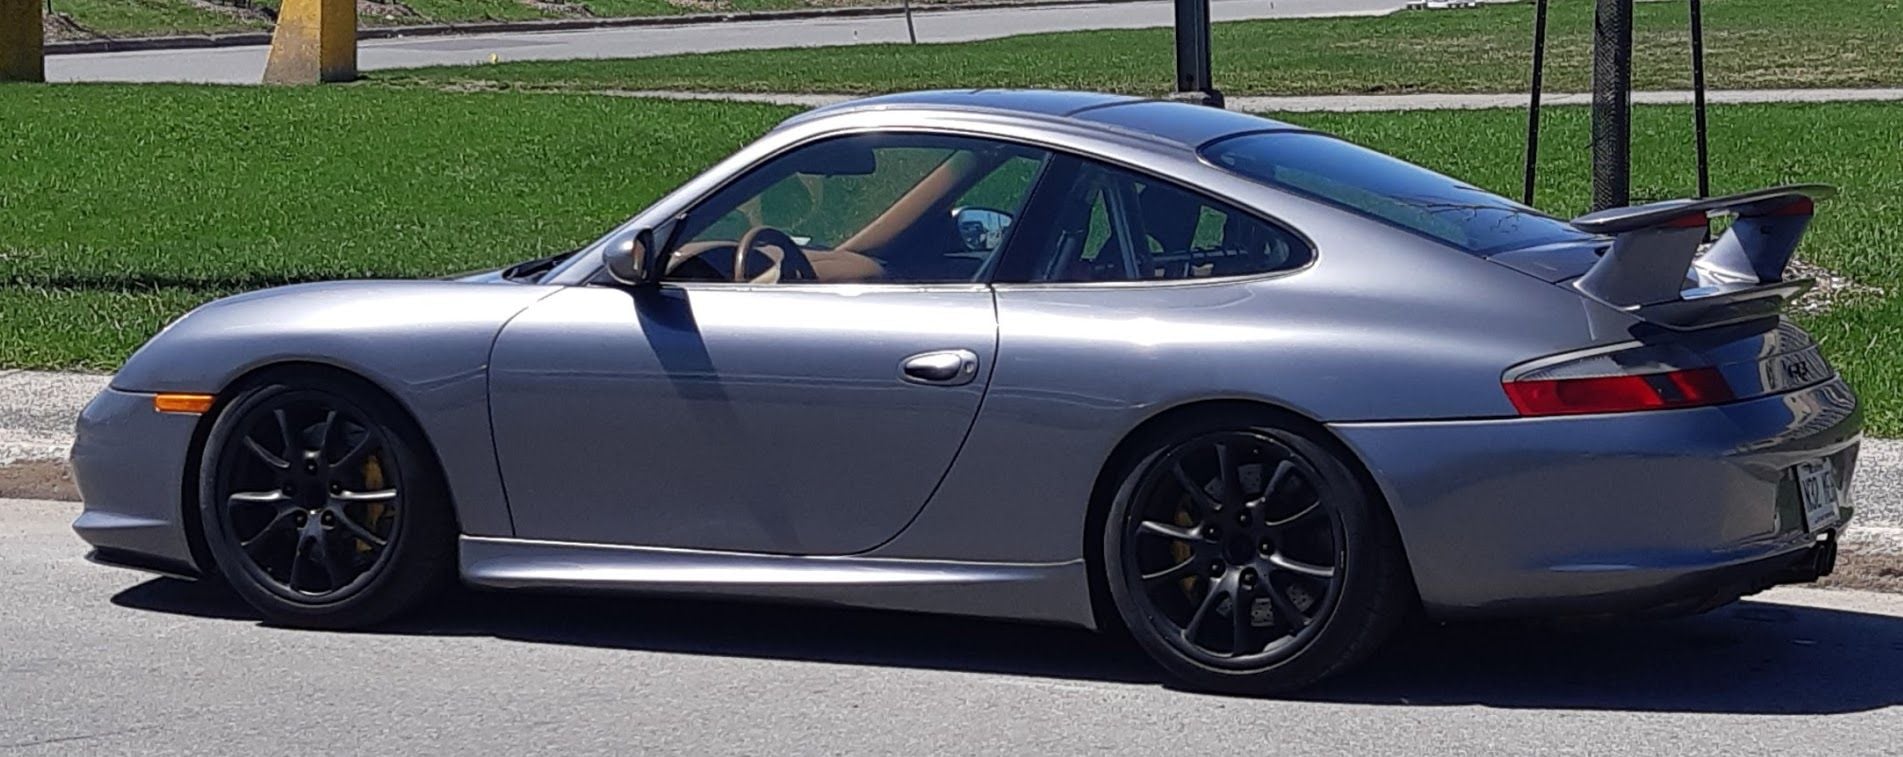 2004 Porsche GT3 - FS: 2004 996 GT3 - Used - VIN WP0AC29914SXXXXXX - 32,500 Miles - 6 cyl - 2WD - Manual - Coupe - Gray - Montreal, QC H4B 2H, Canada